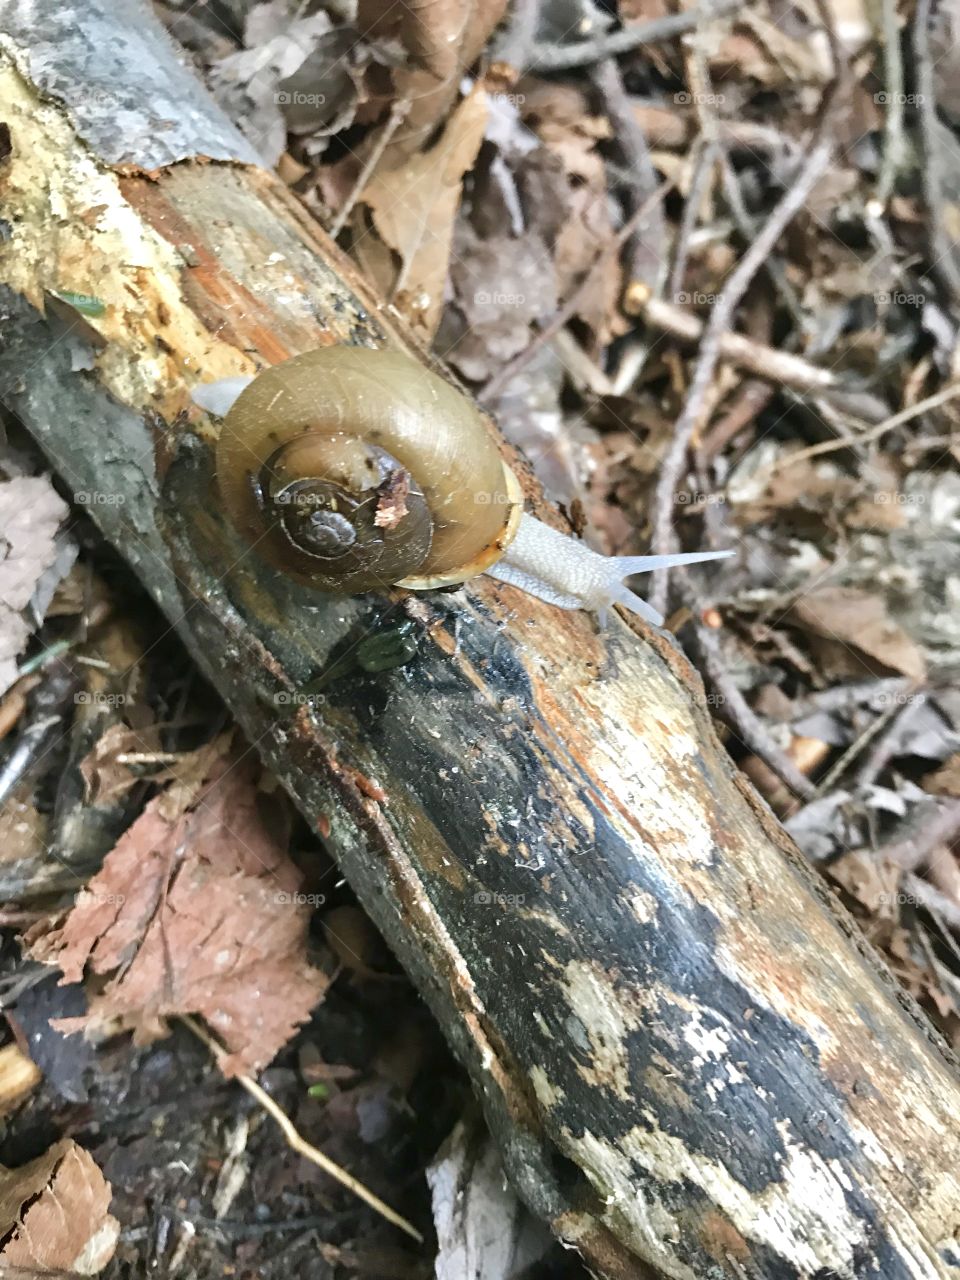 A snail in the woods